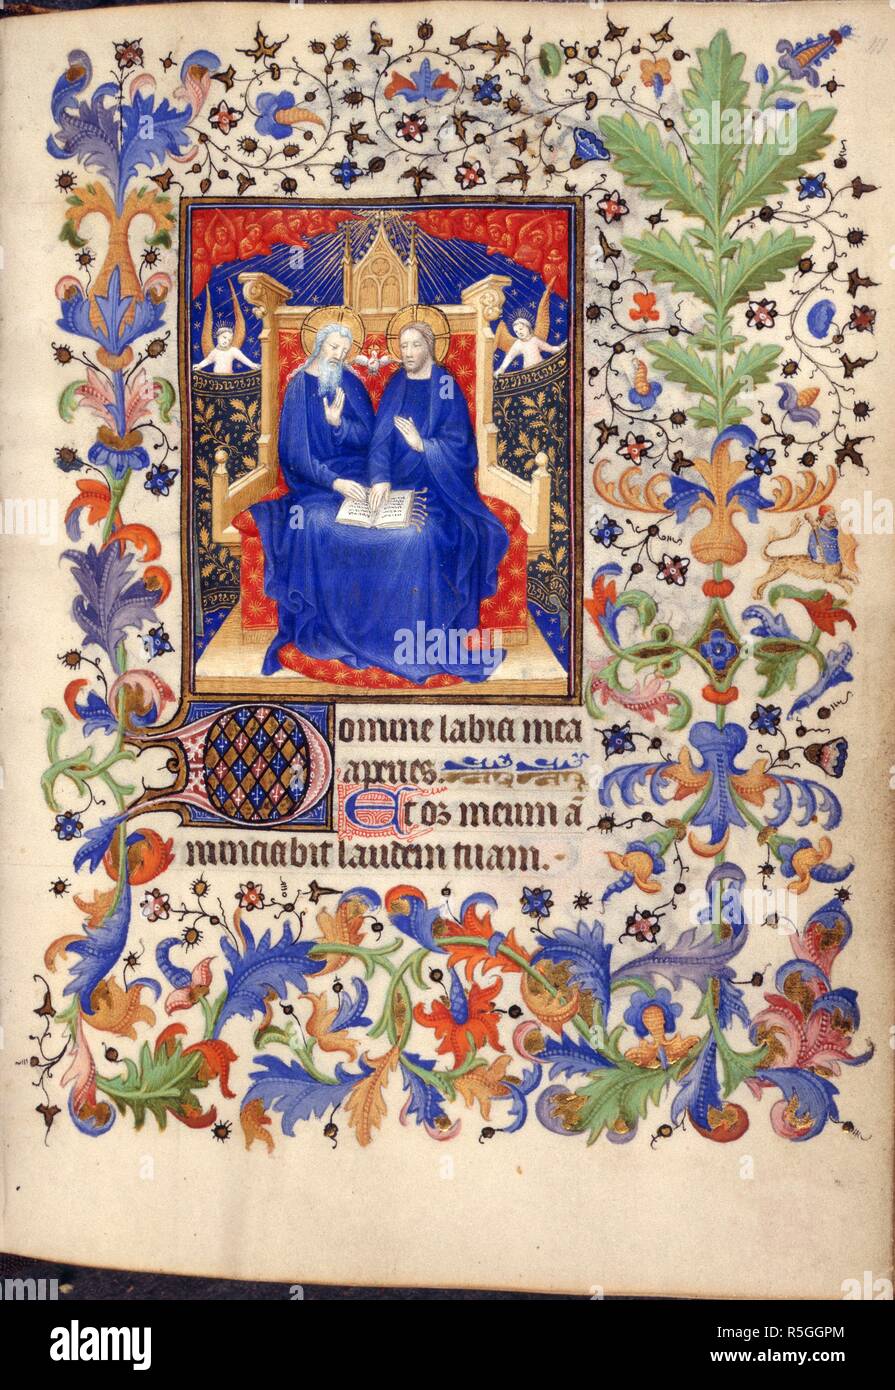 The Holy Trinity. Chevalier Hours. France [Paris]; circa 1420. [Whole folio] Office of Holy Trinity. The Holy Trinity; God the Father and Christ seated, with the Holy Dove between them. Text with decorated initial 'D'. Borders with foliage decoration  Image taken from Chevalier Hours.  Originally published/produced in France [Paris]; circa 1420. . Source: Add. 16997, f.111. Language: Latin. Stock Photo